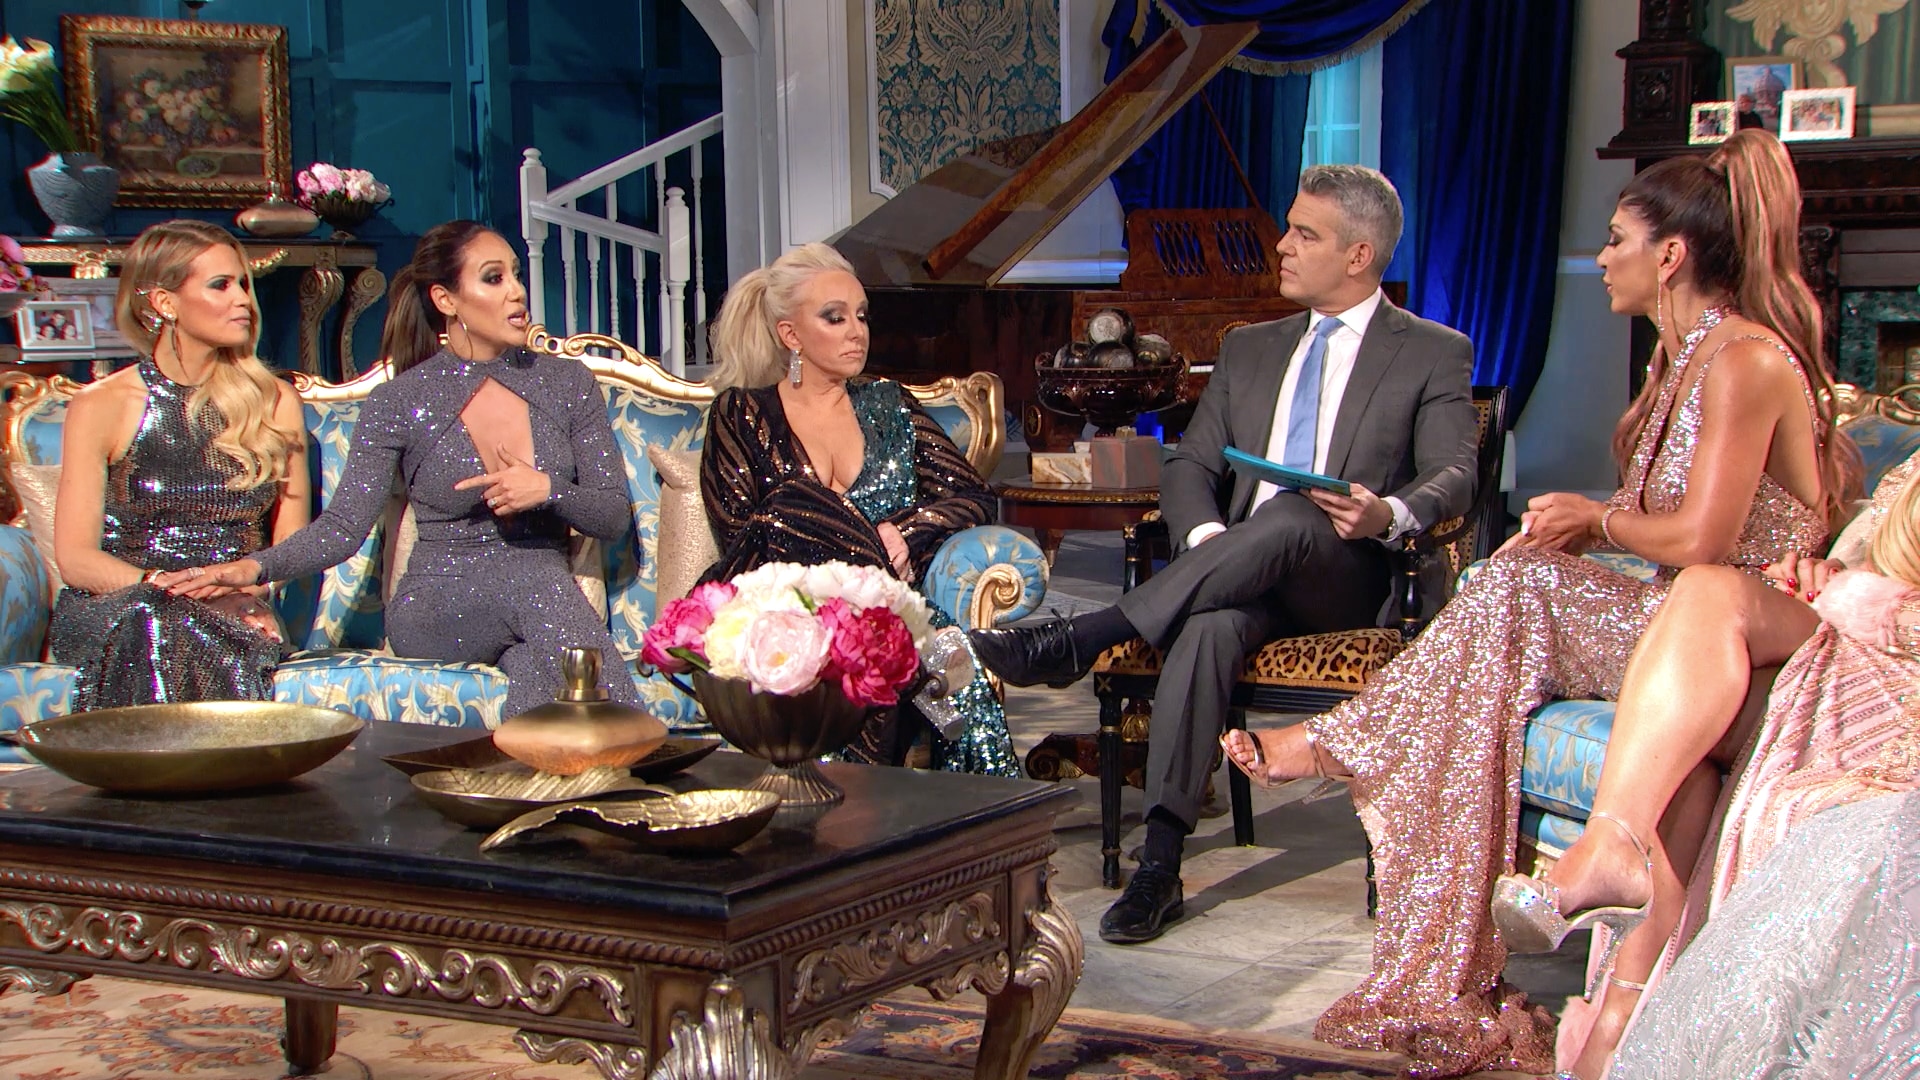 Watch The Real Housewives of New Jersey Episode Reunion Part 1